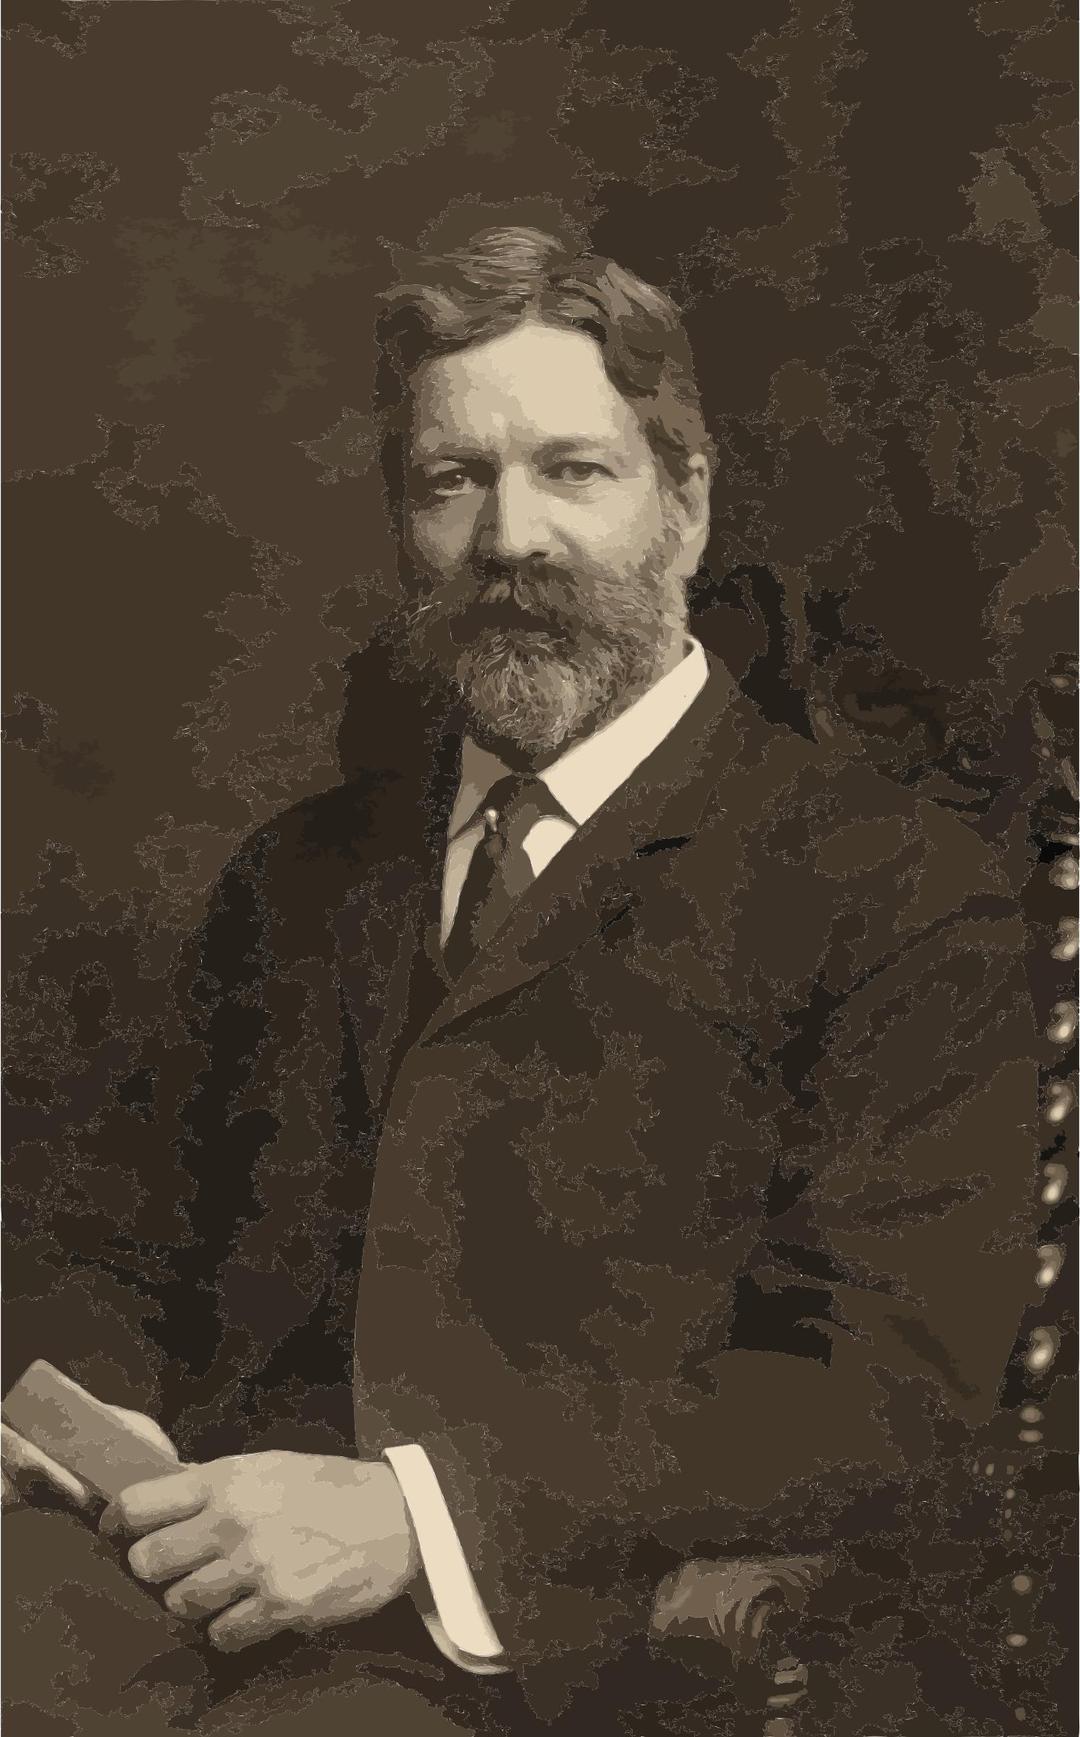 Pach Brothers - George Foster Peabody png transparent